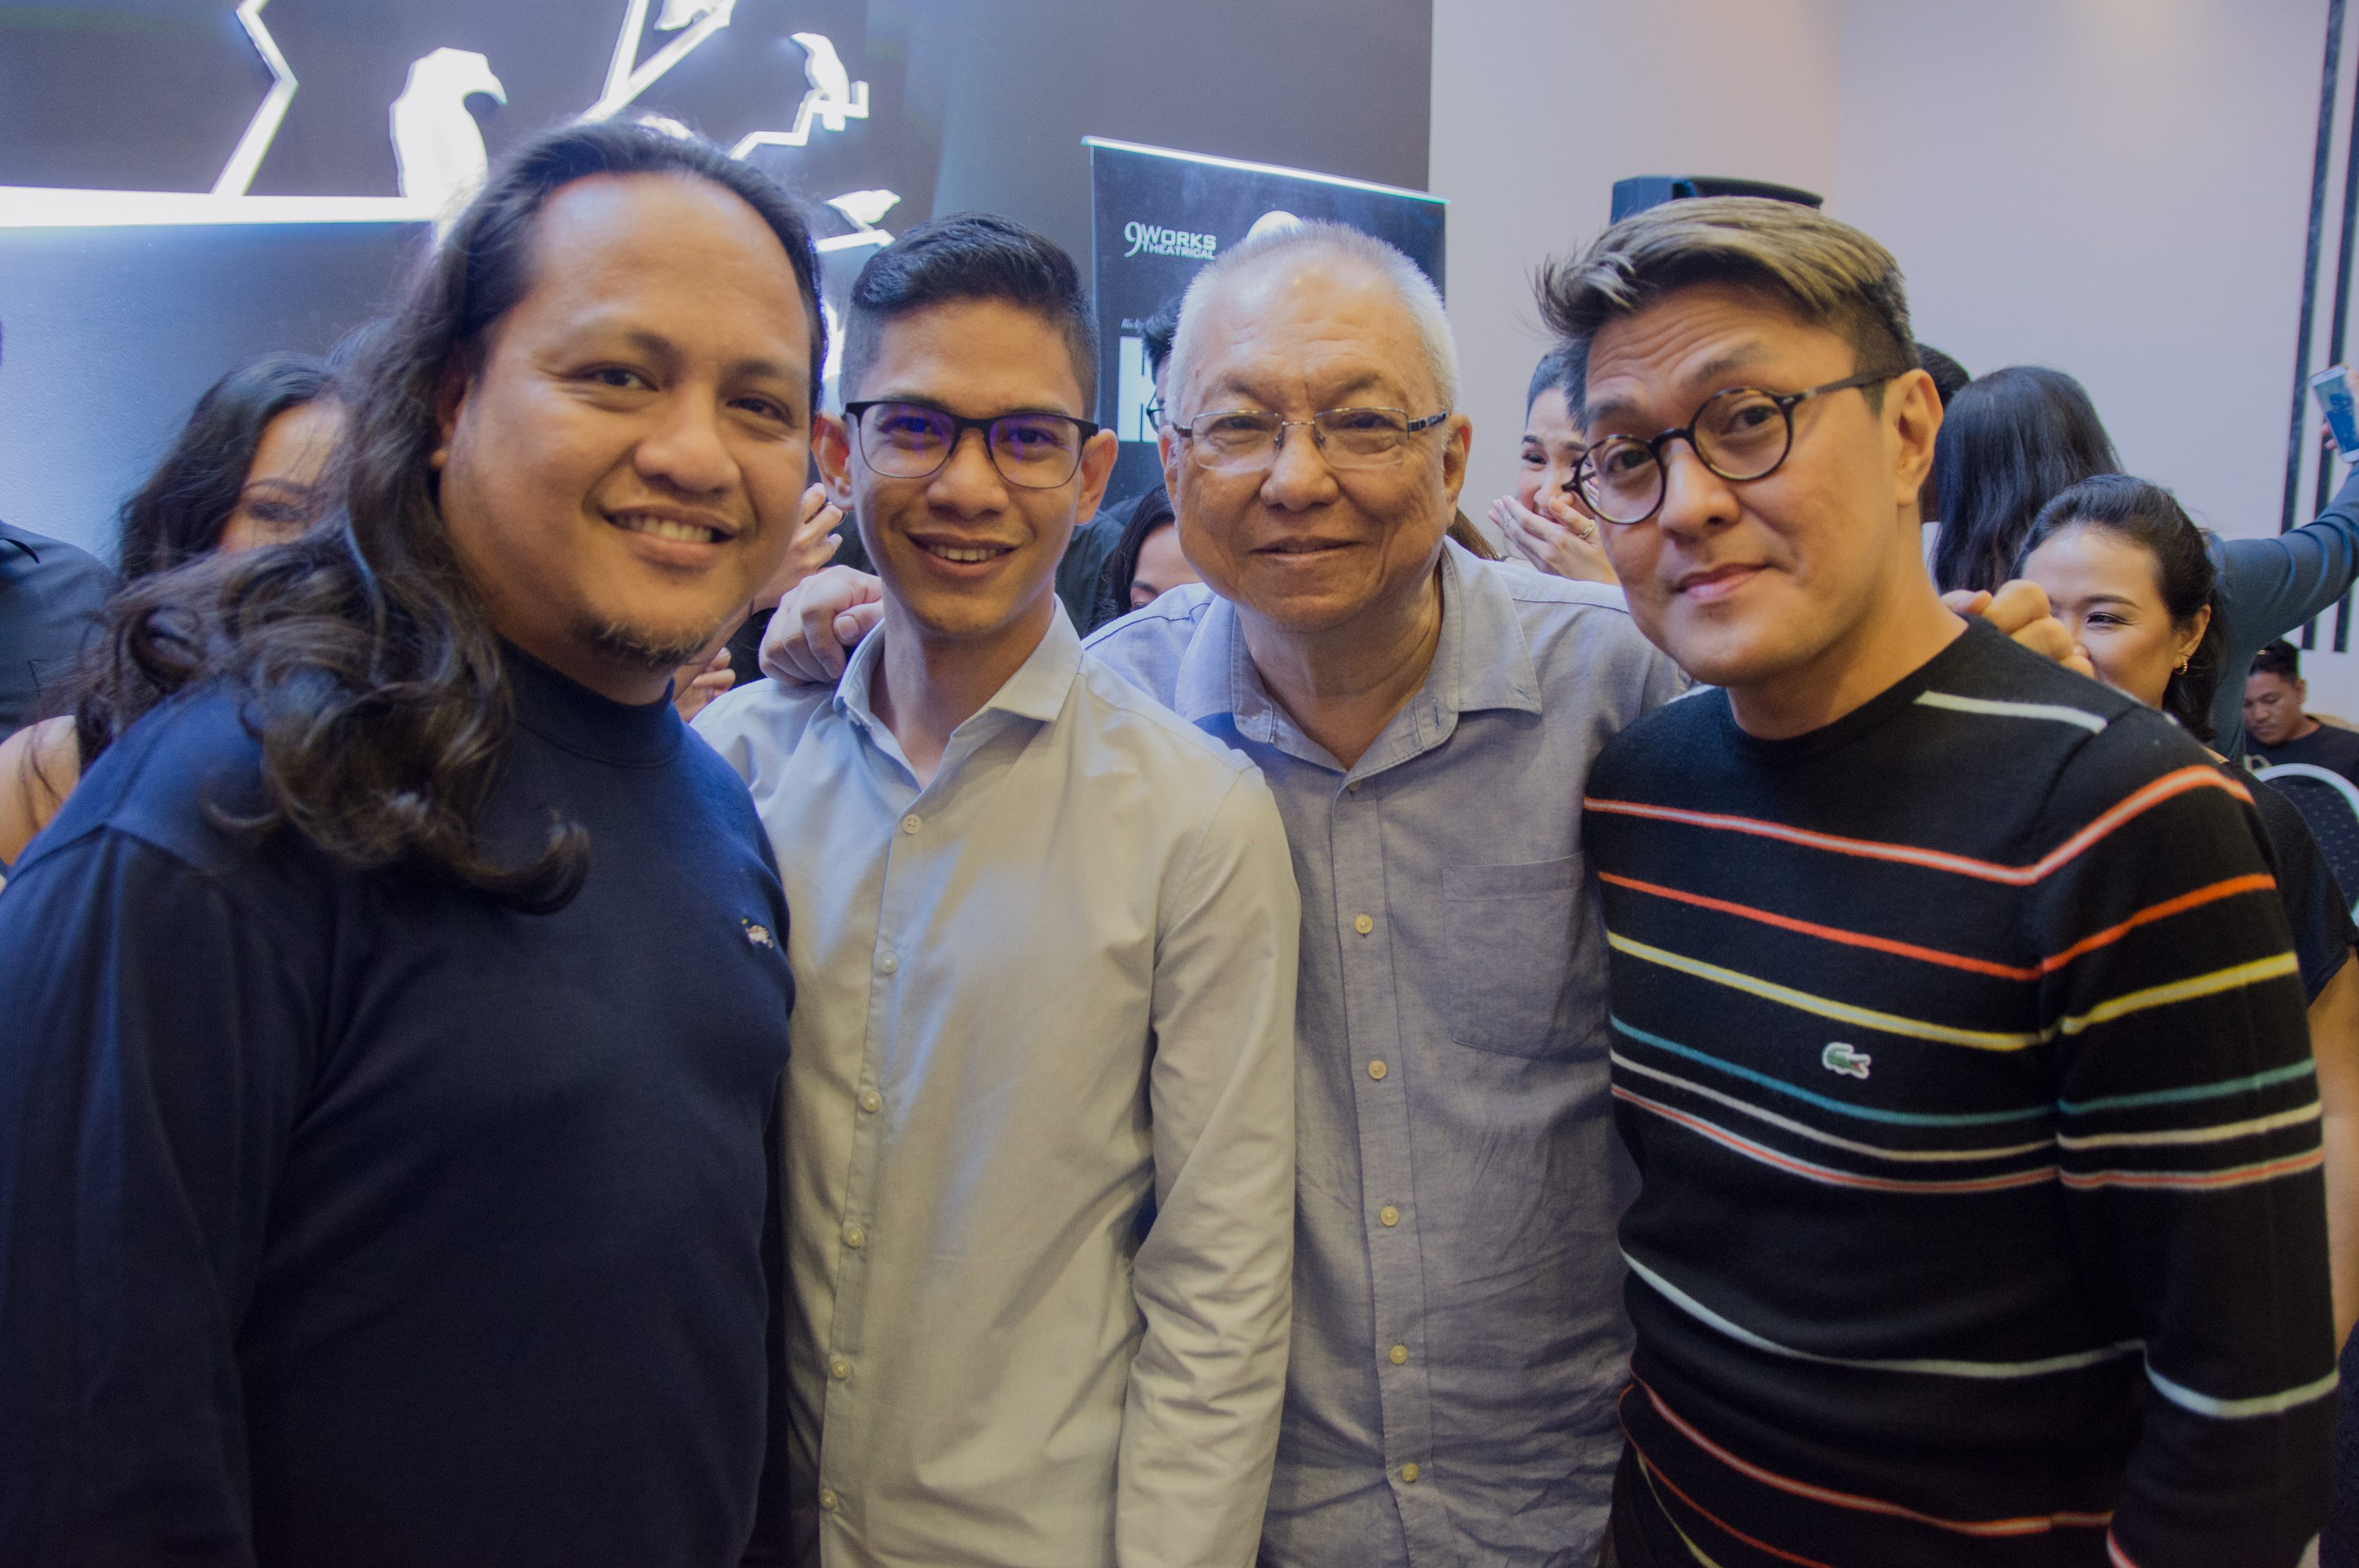 THE TEAM. From L to R: Joed Balsamo, Ed Lacson Jr., Ricky Lee, and Vincent de Jesus. Photo courtesy of The Sandbox Collective and 9 Works Theatrical  